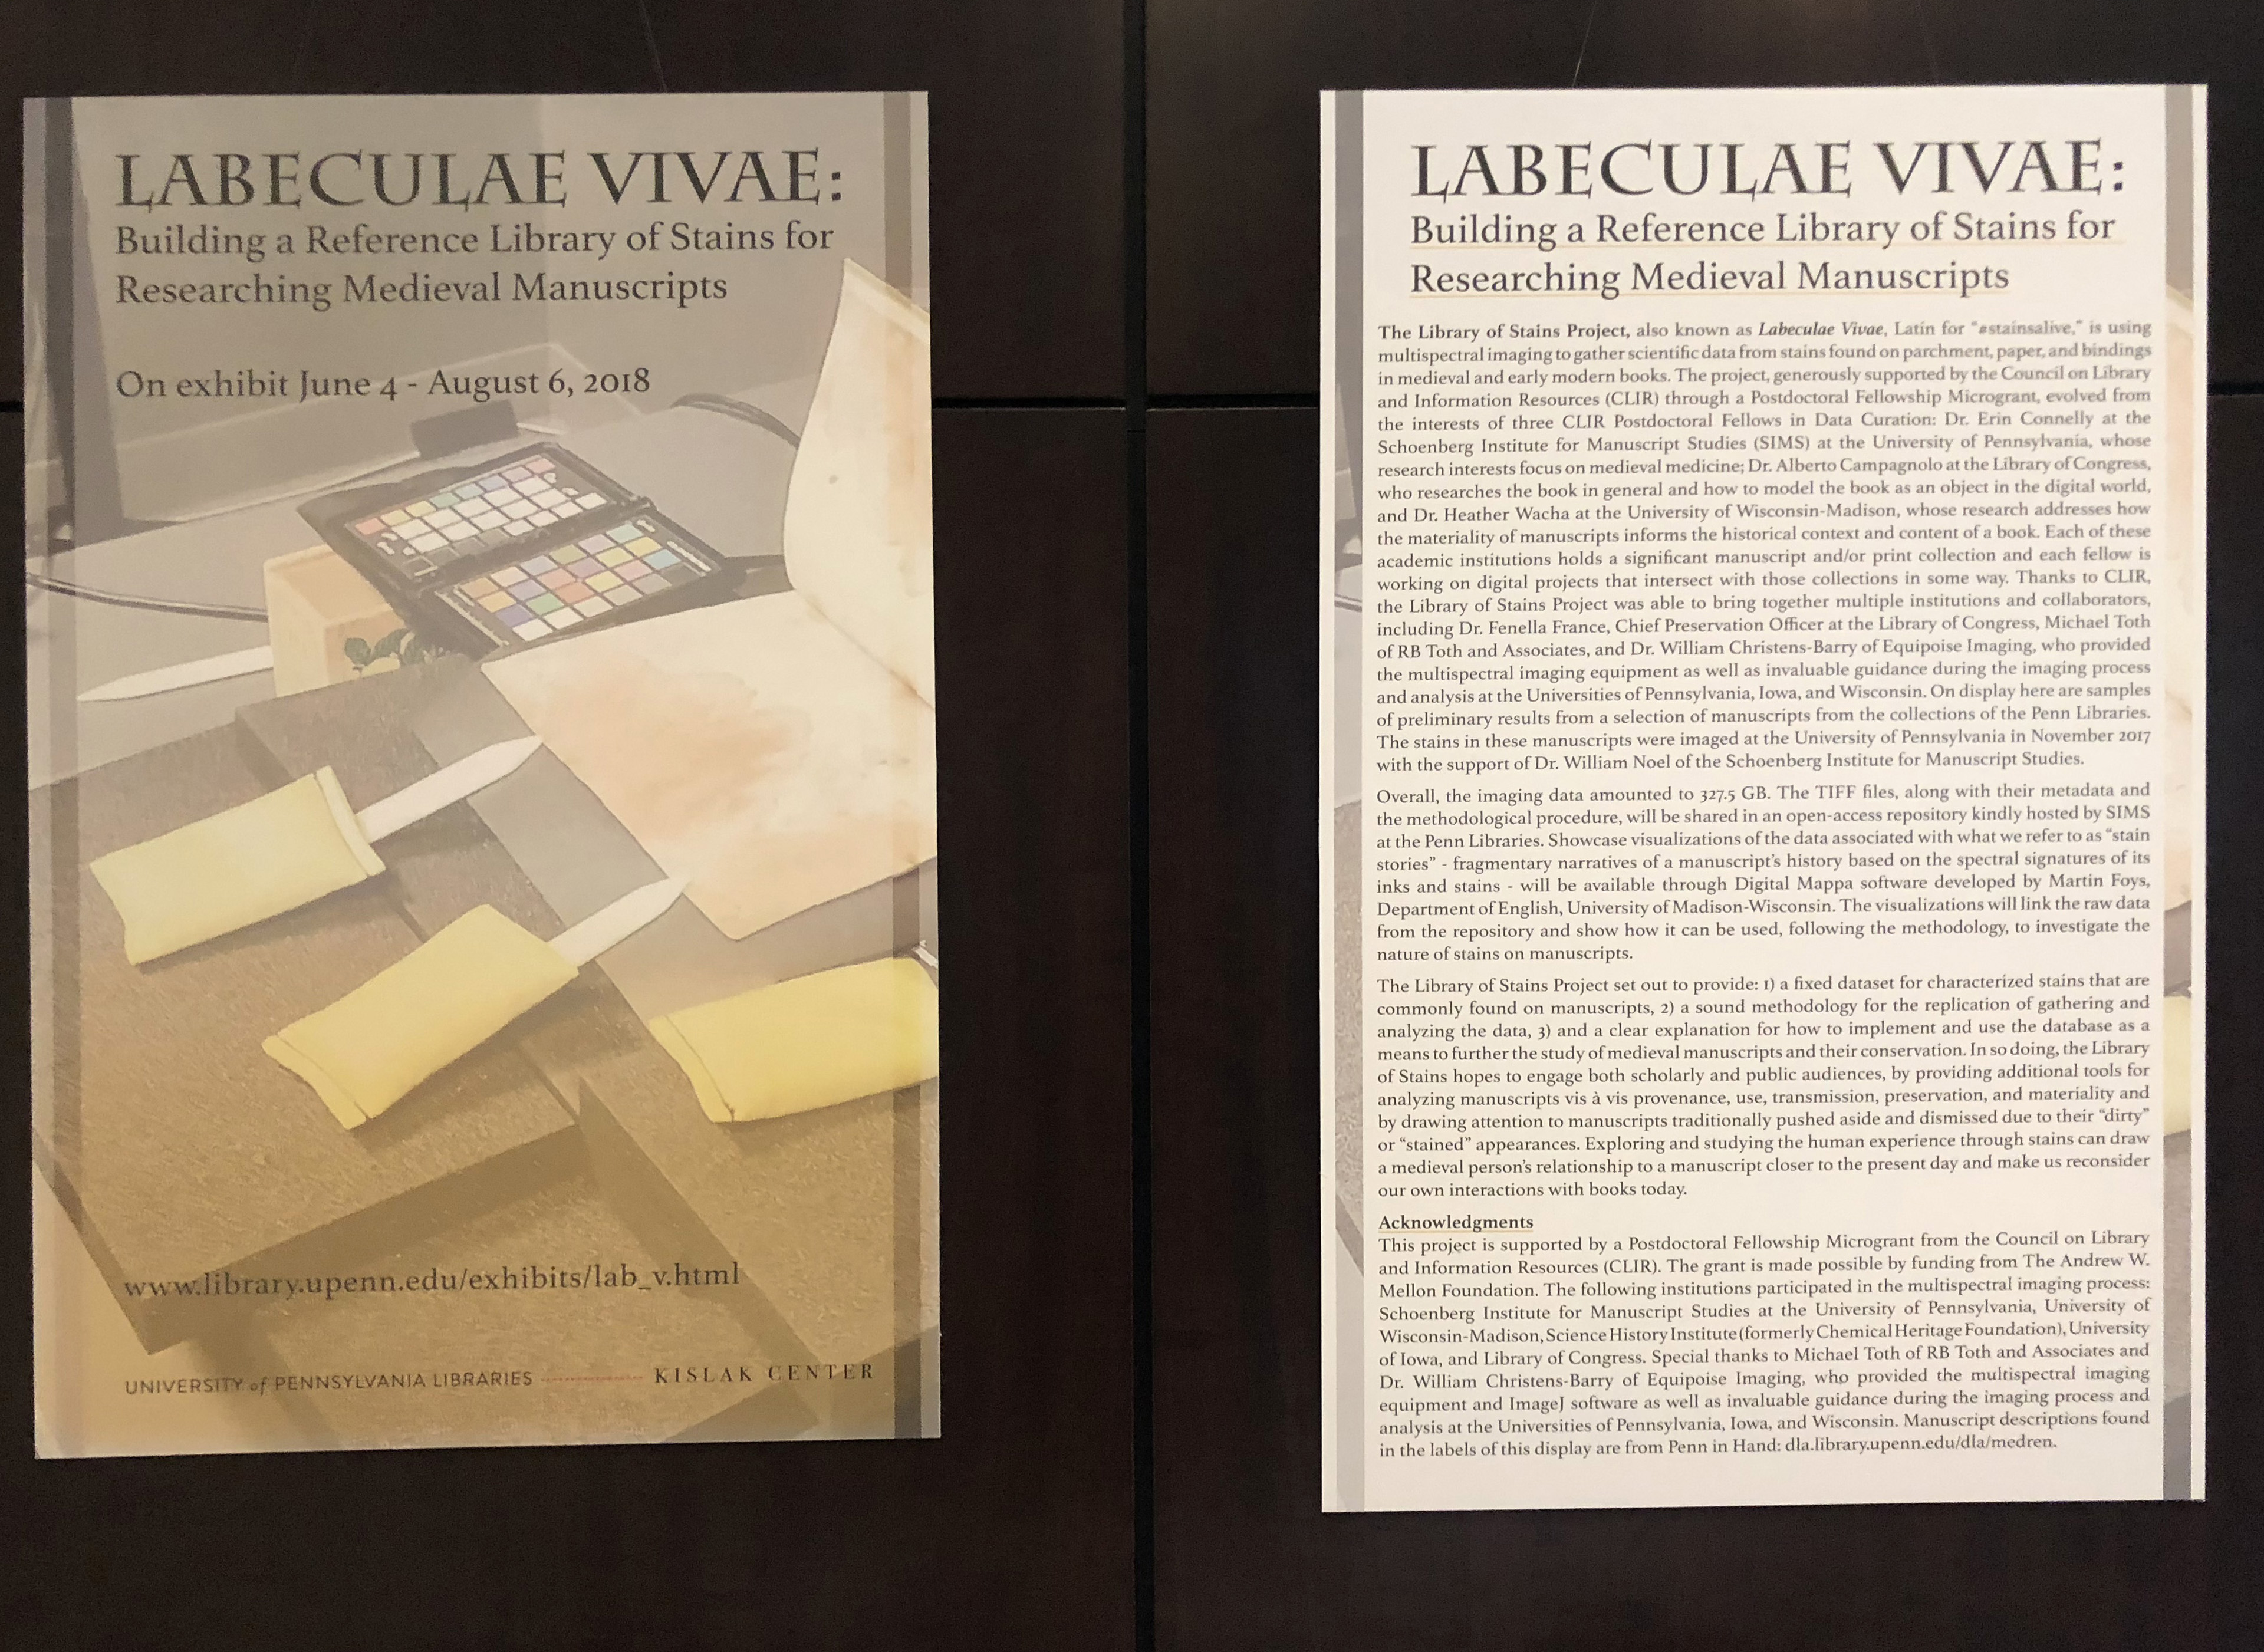 Labeculae Vivae poster and introduction